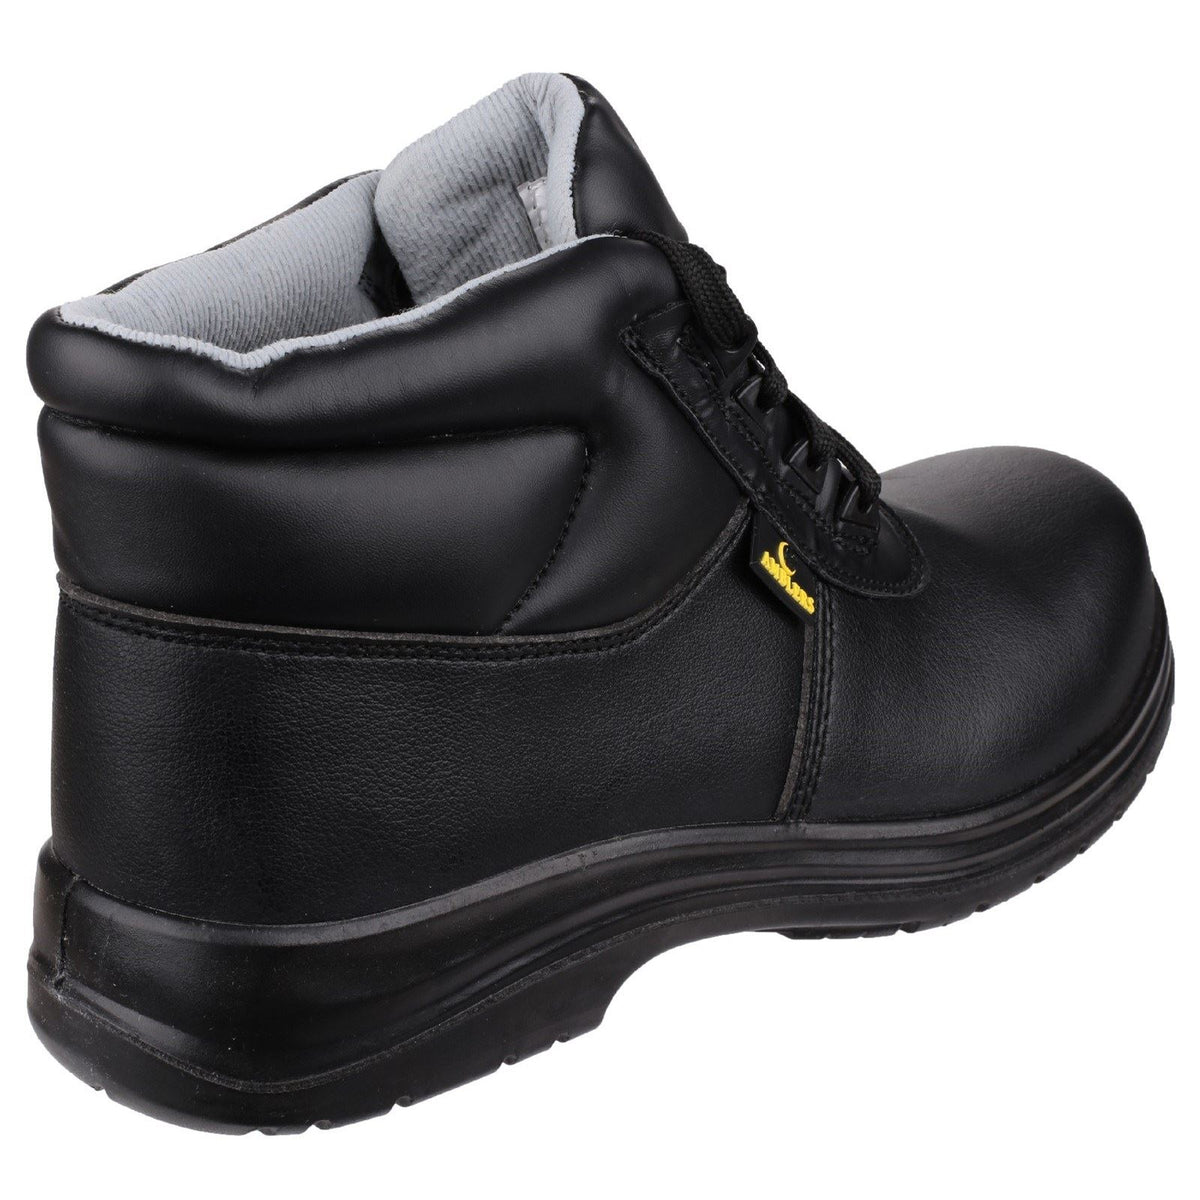 Amblers Safety FS663 Safety Boots